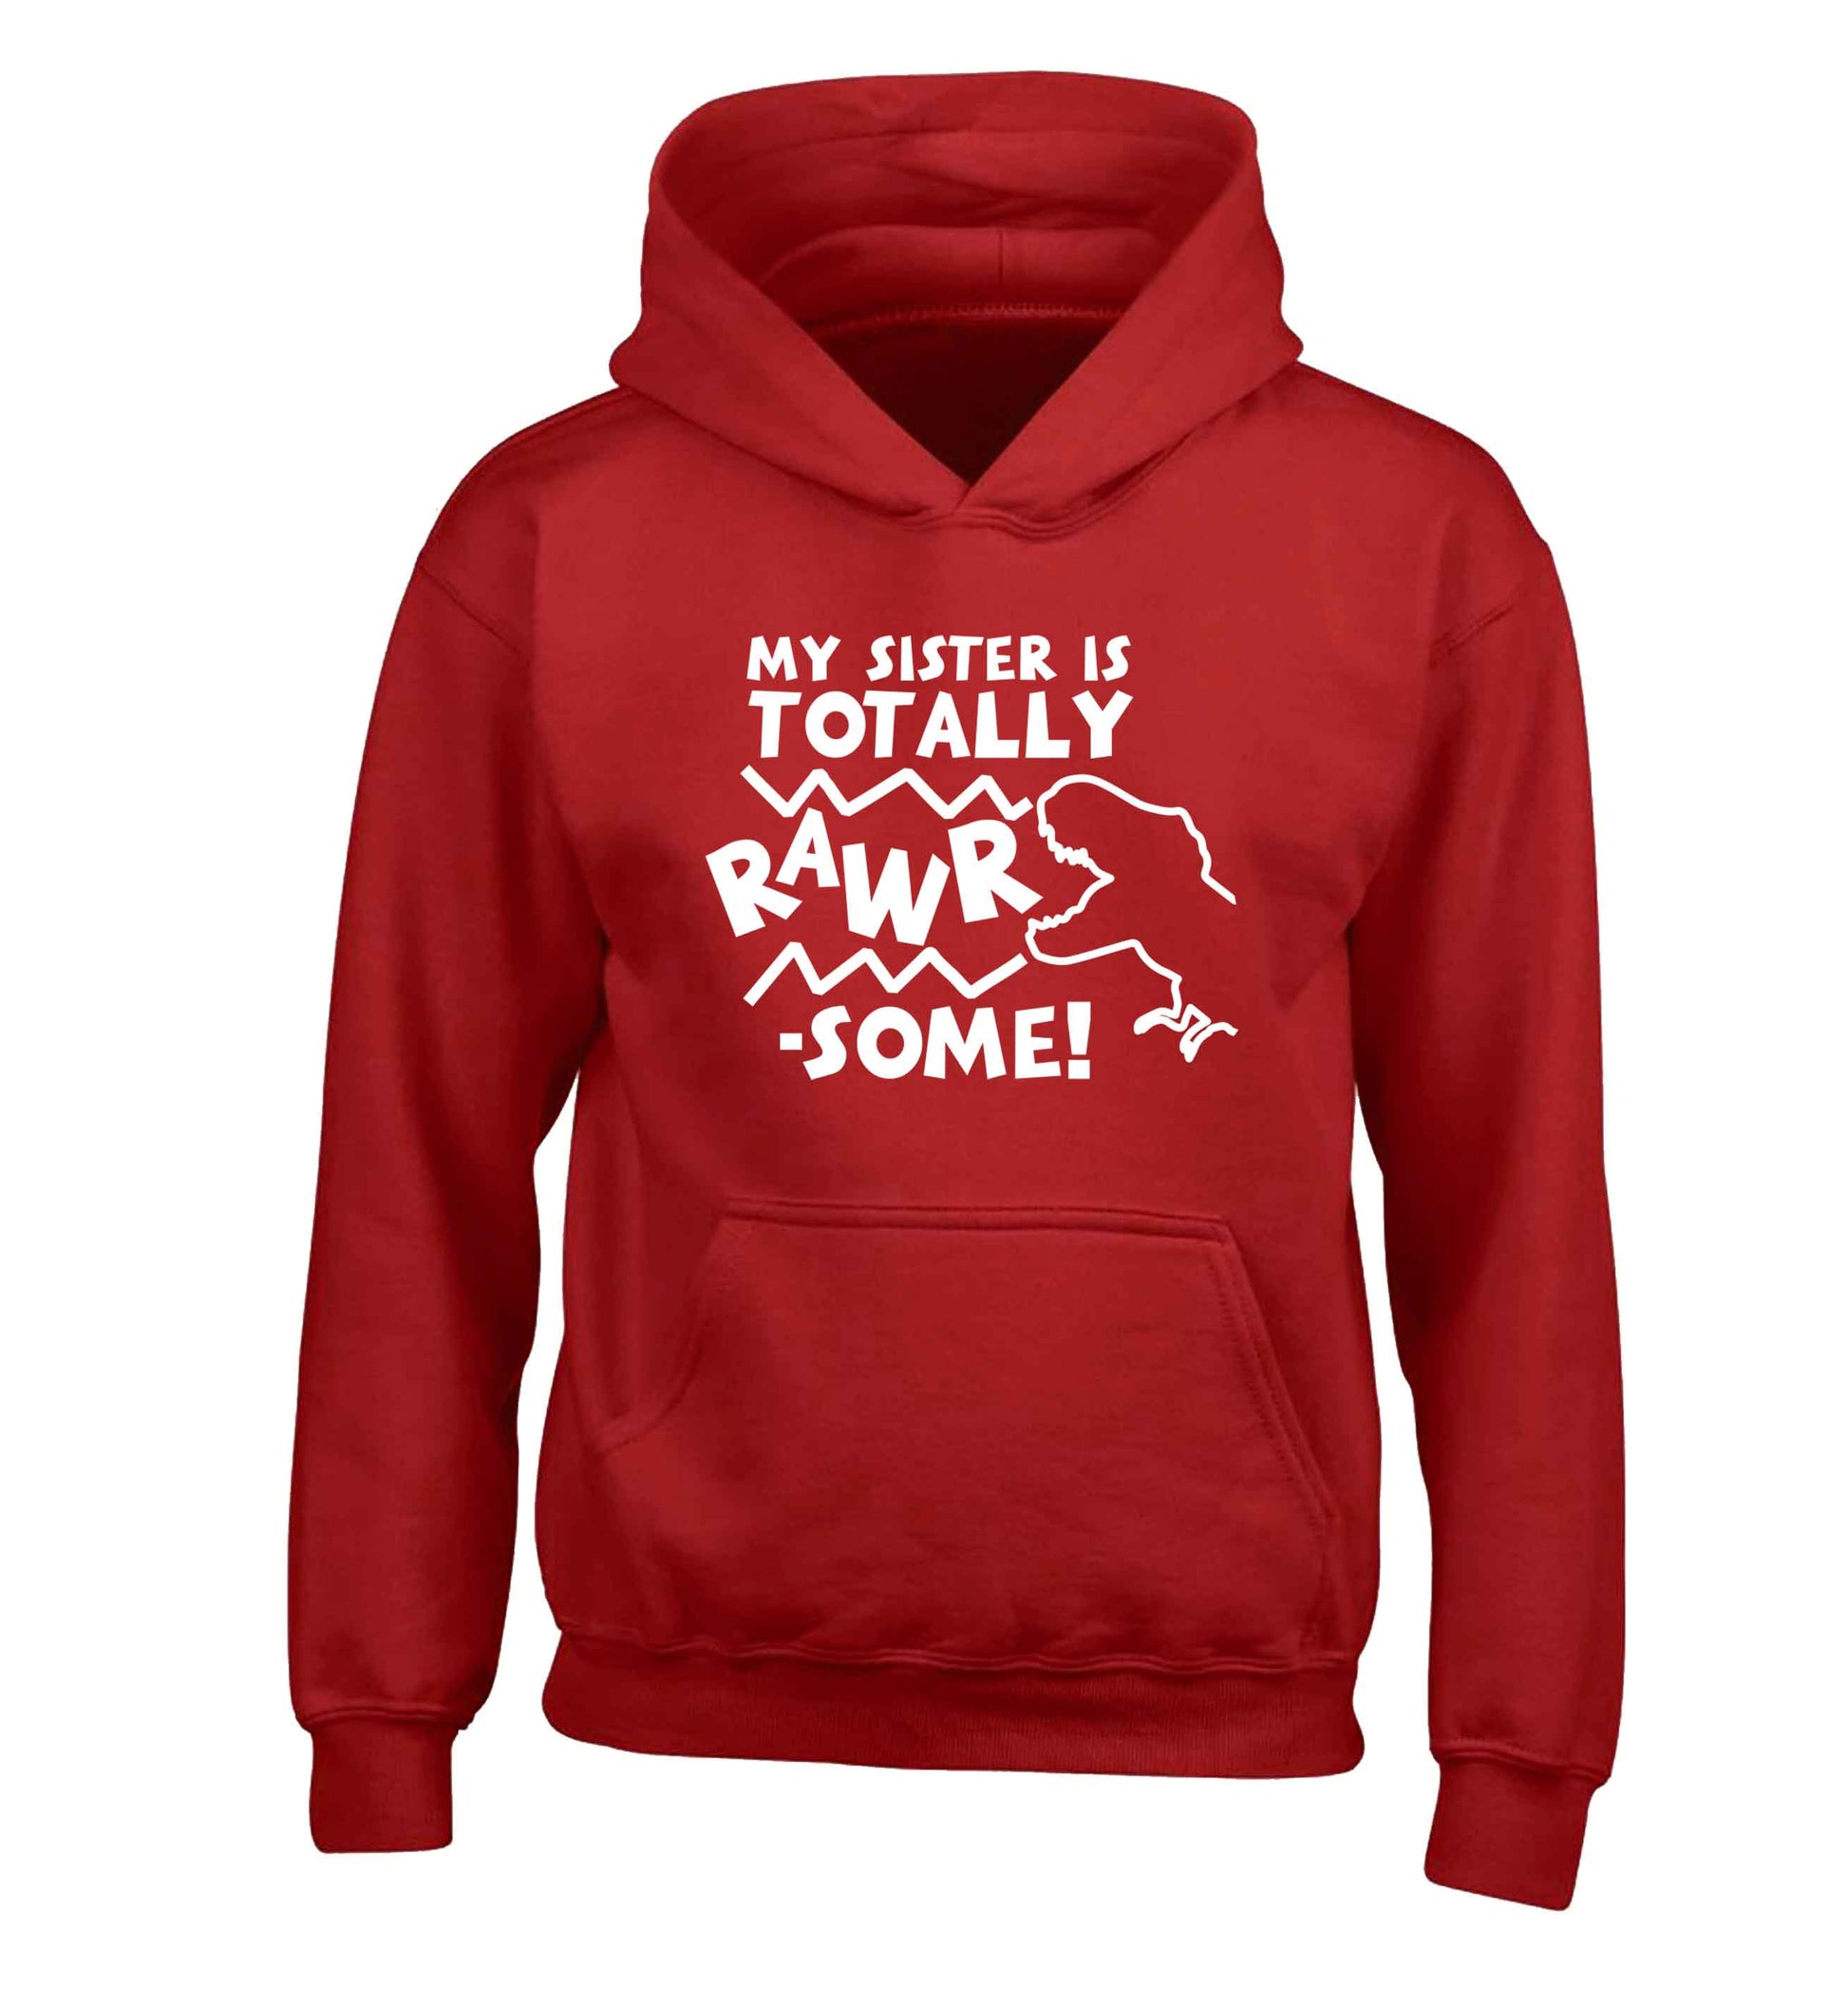 My sister is totally rawrsome children's red hoodie 12-13 Years